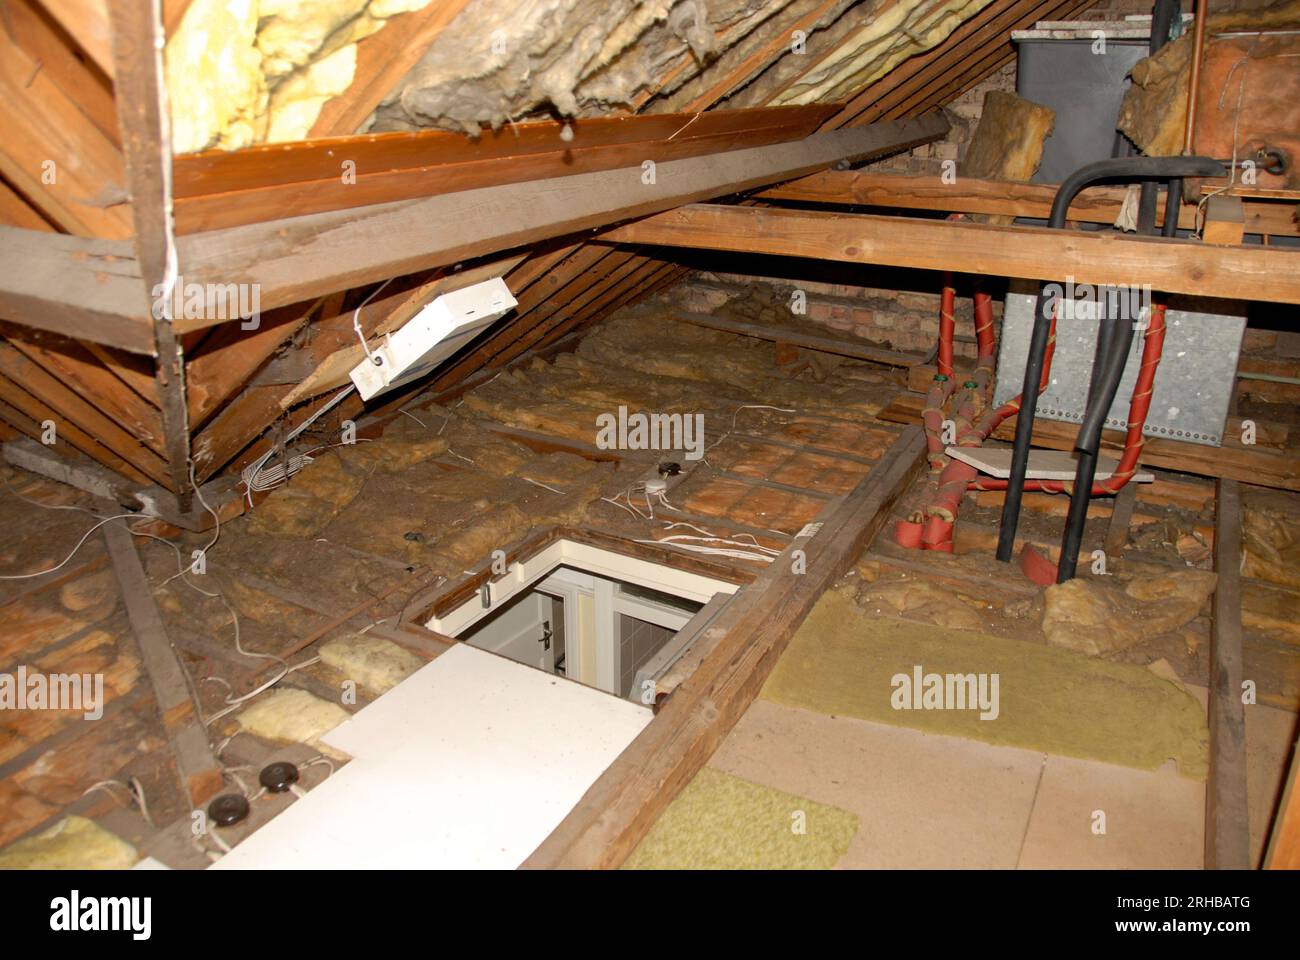 Interior of domestic loft with insulation and cold water tank and feeder tank for central heating and access hatch open Stock Photo